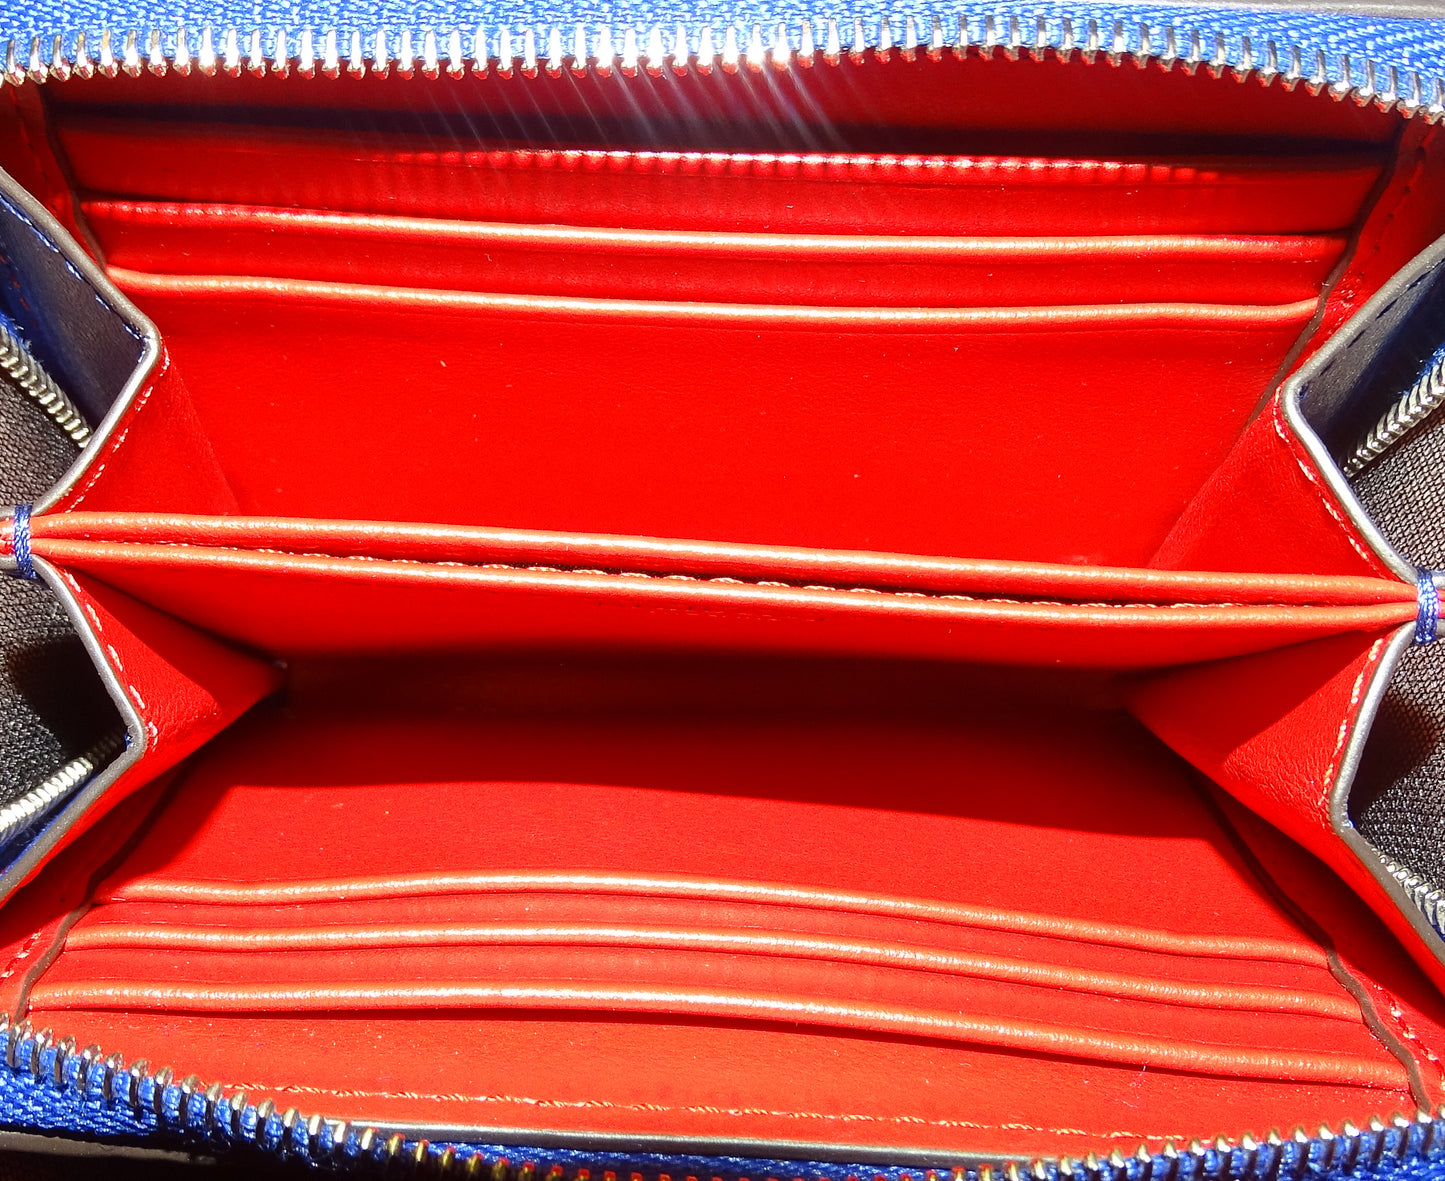 Mulberry Small Zip Around Purse Red & Blue